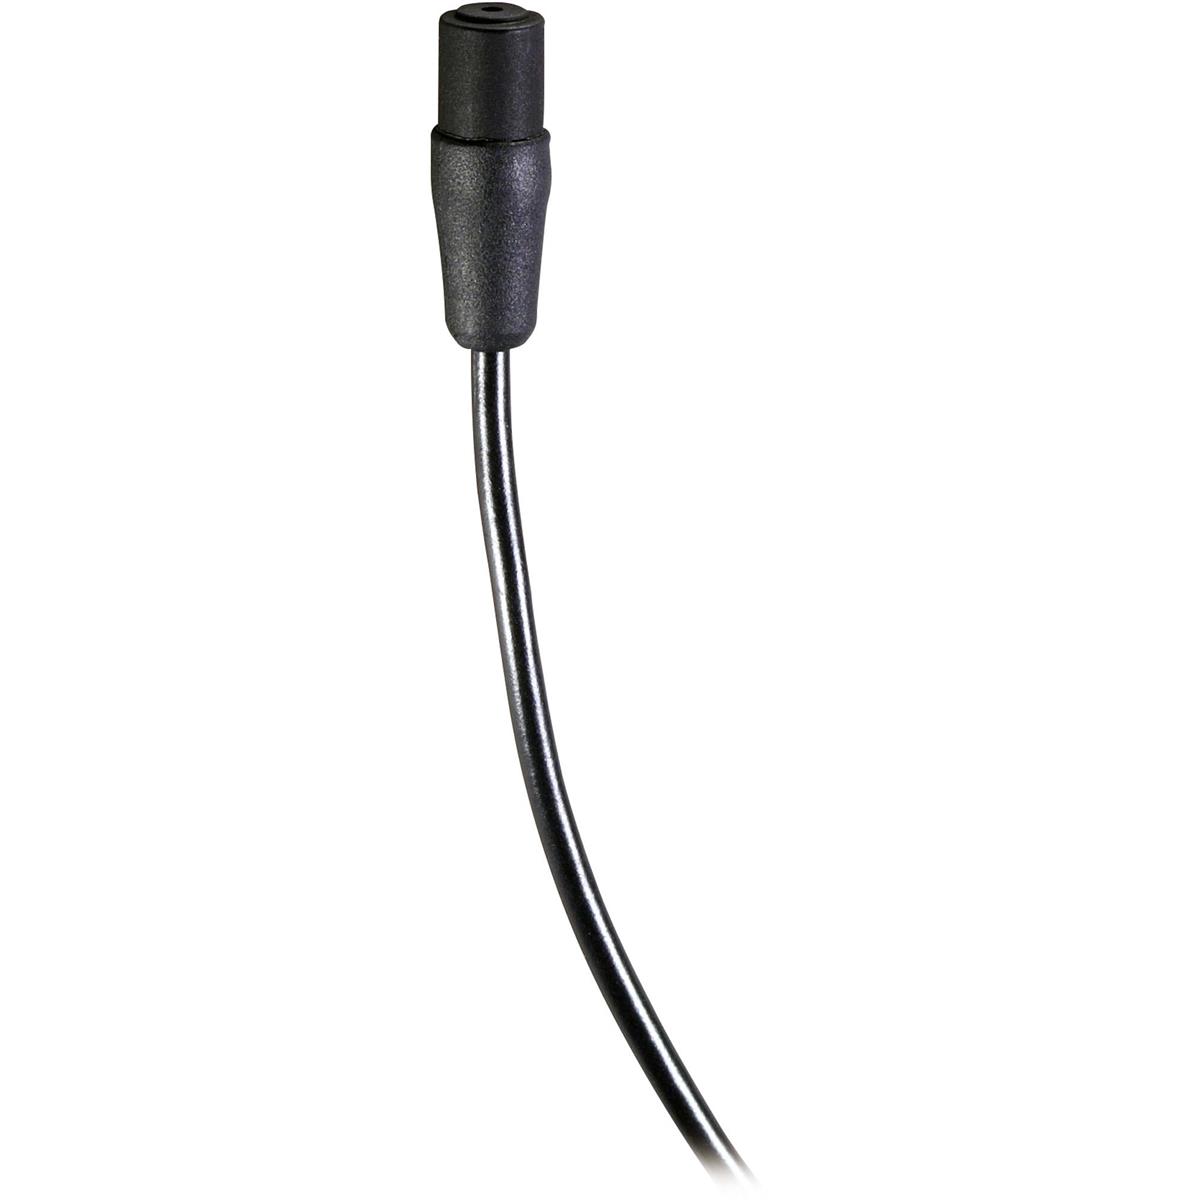 Image of Audio-Technica AT899 Condenser Lavalier Microphone